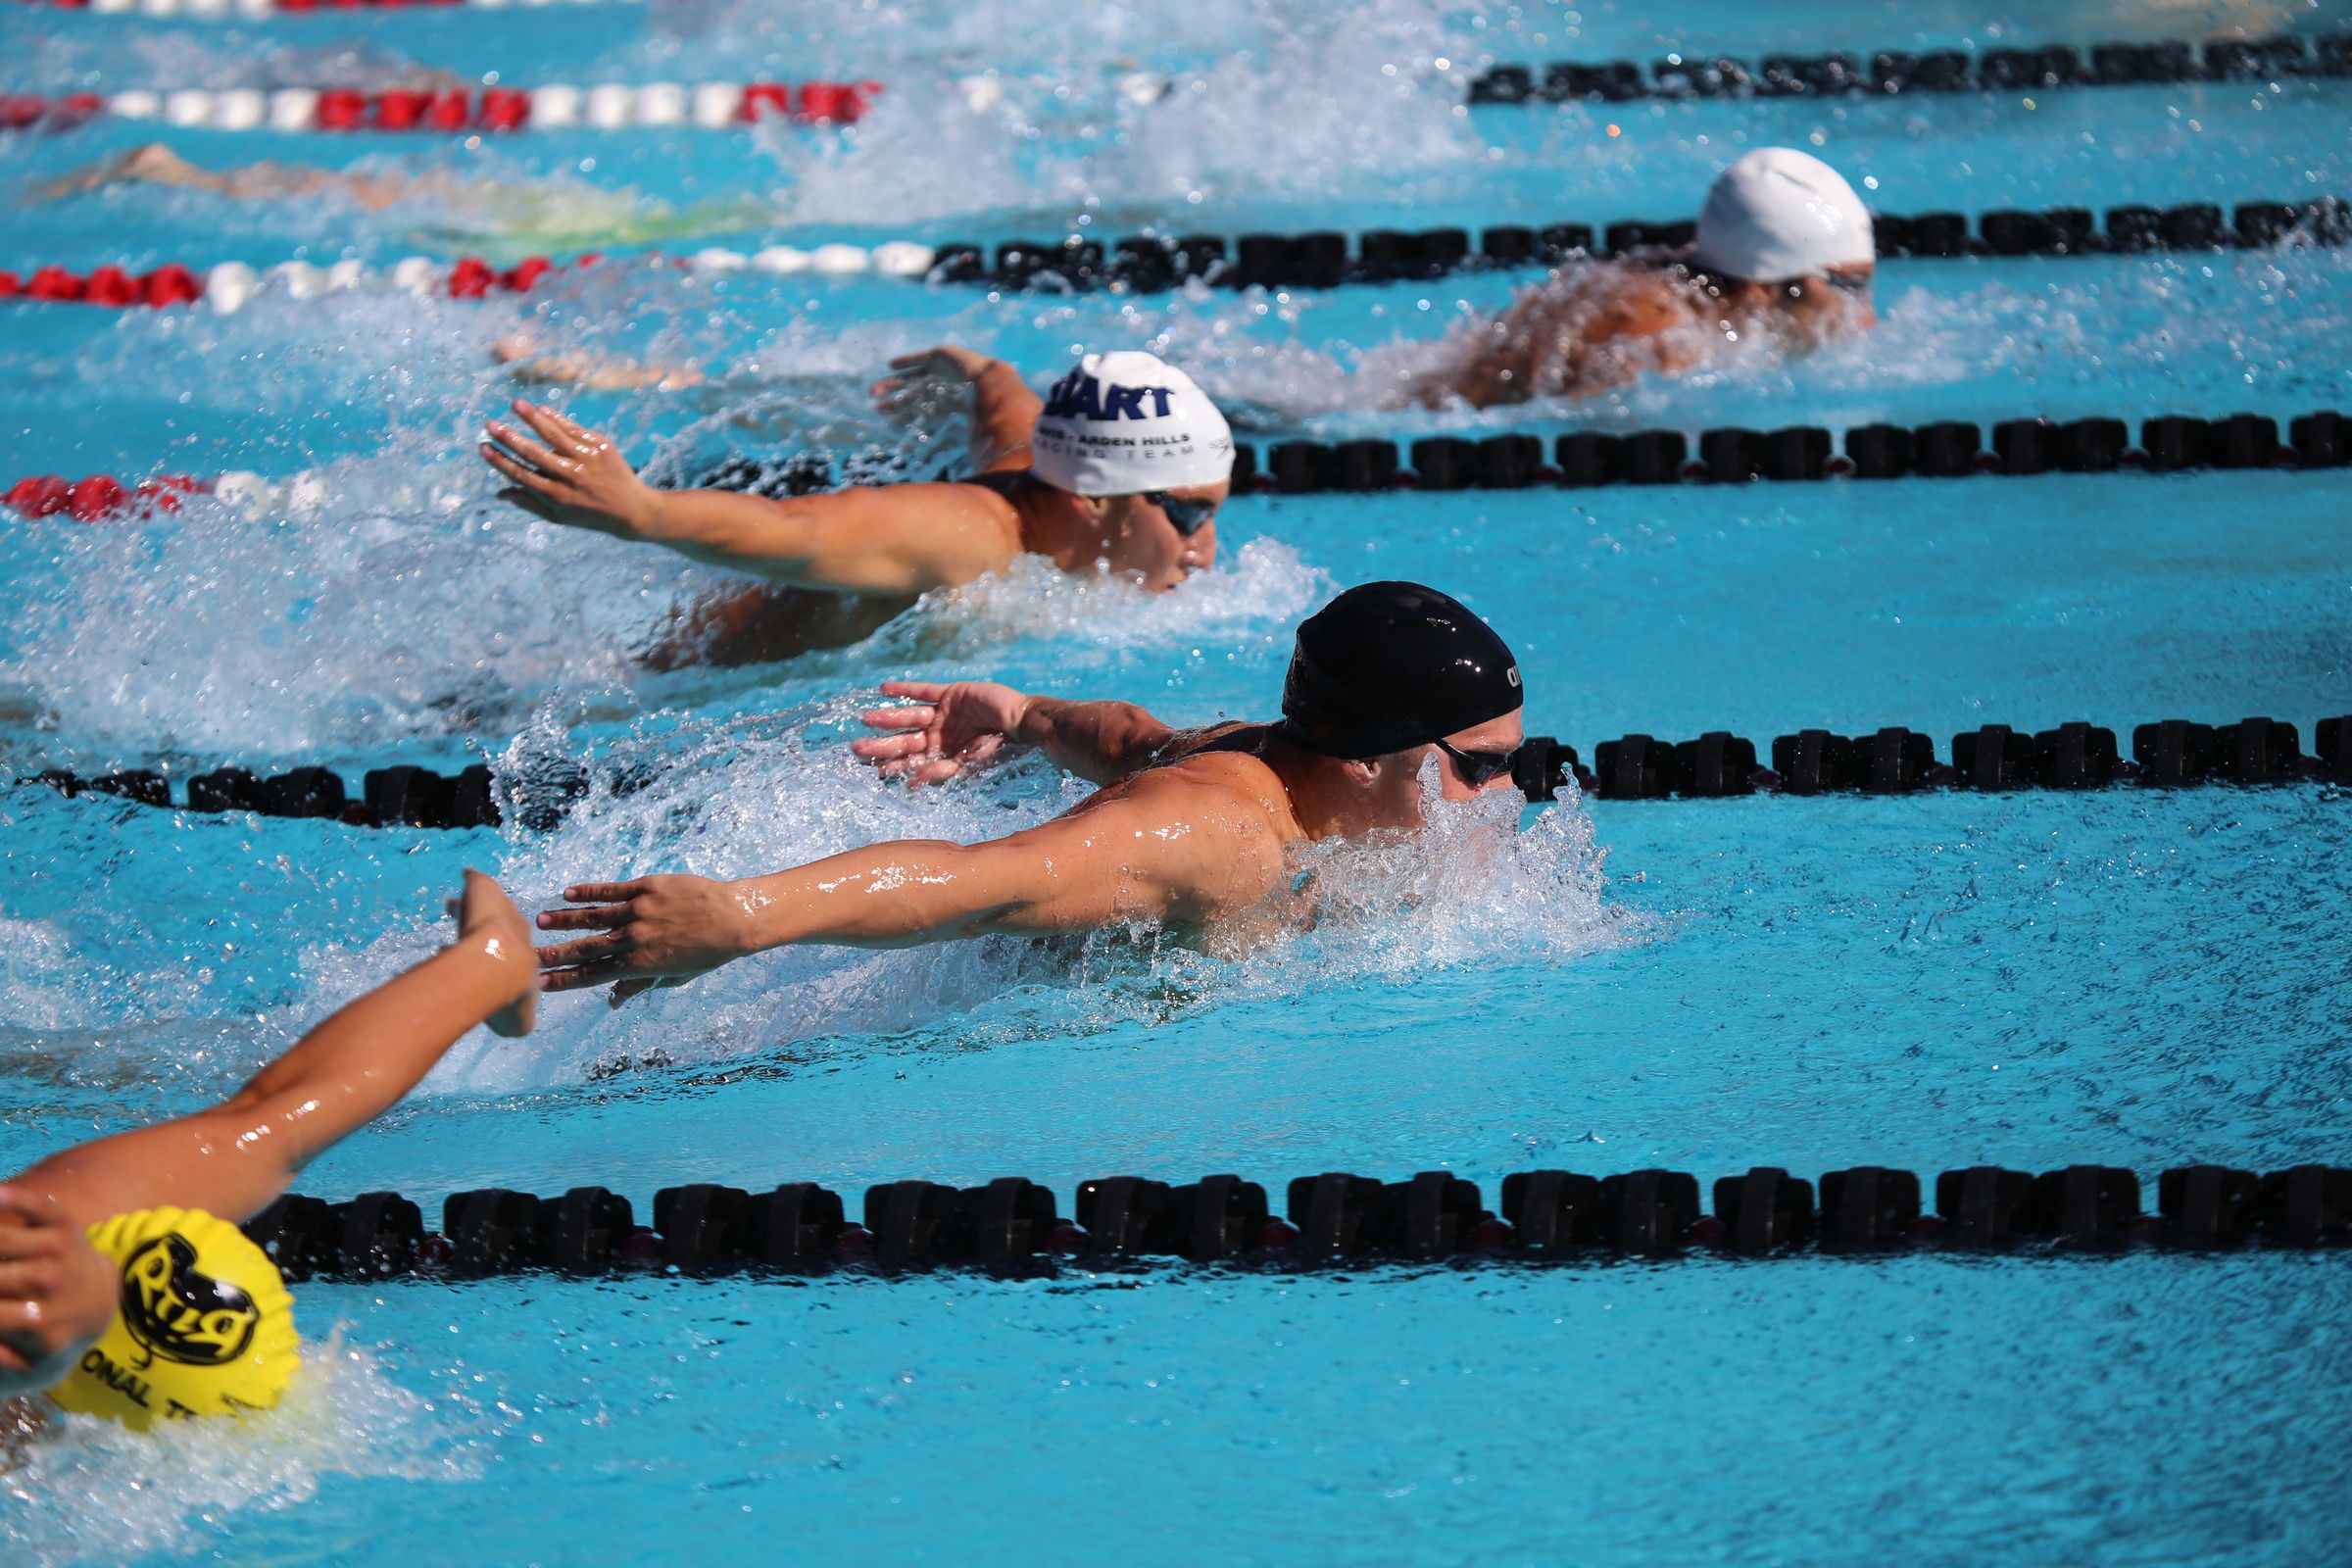 30 Minute Water Polo Workouts In The Pool for Women